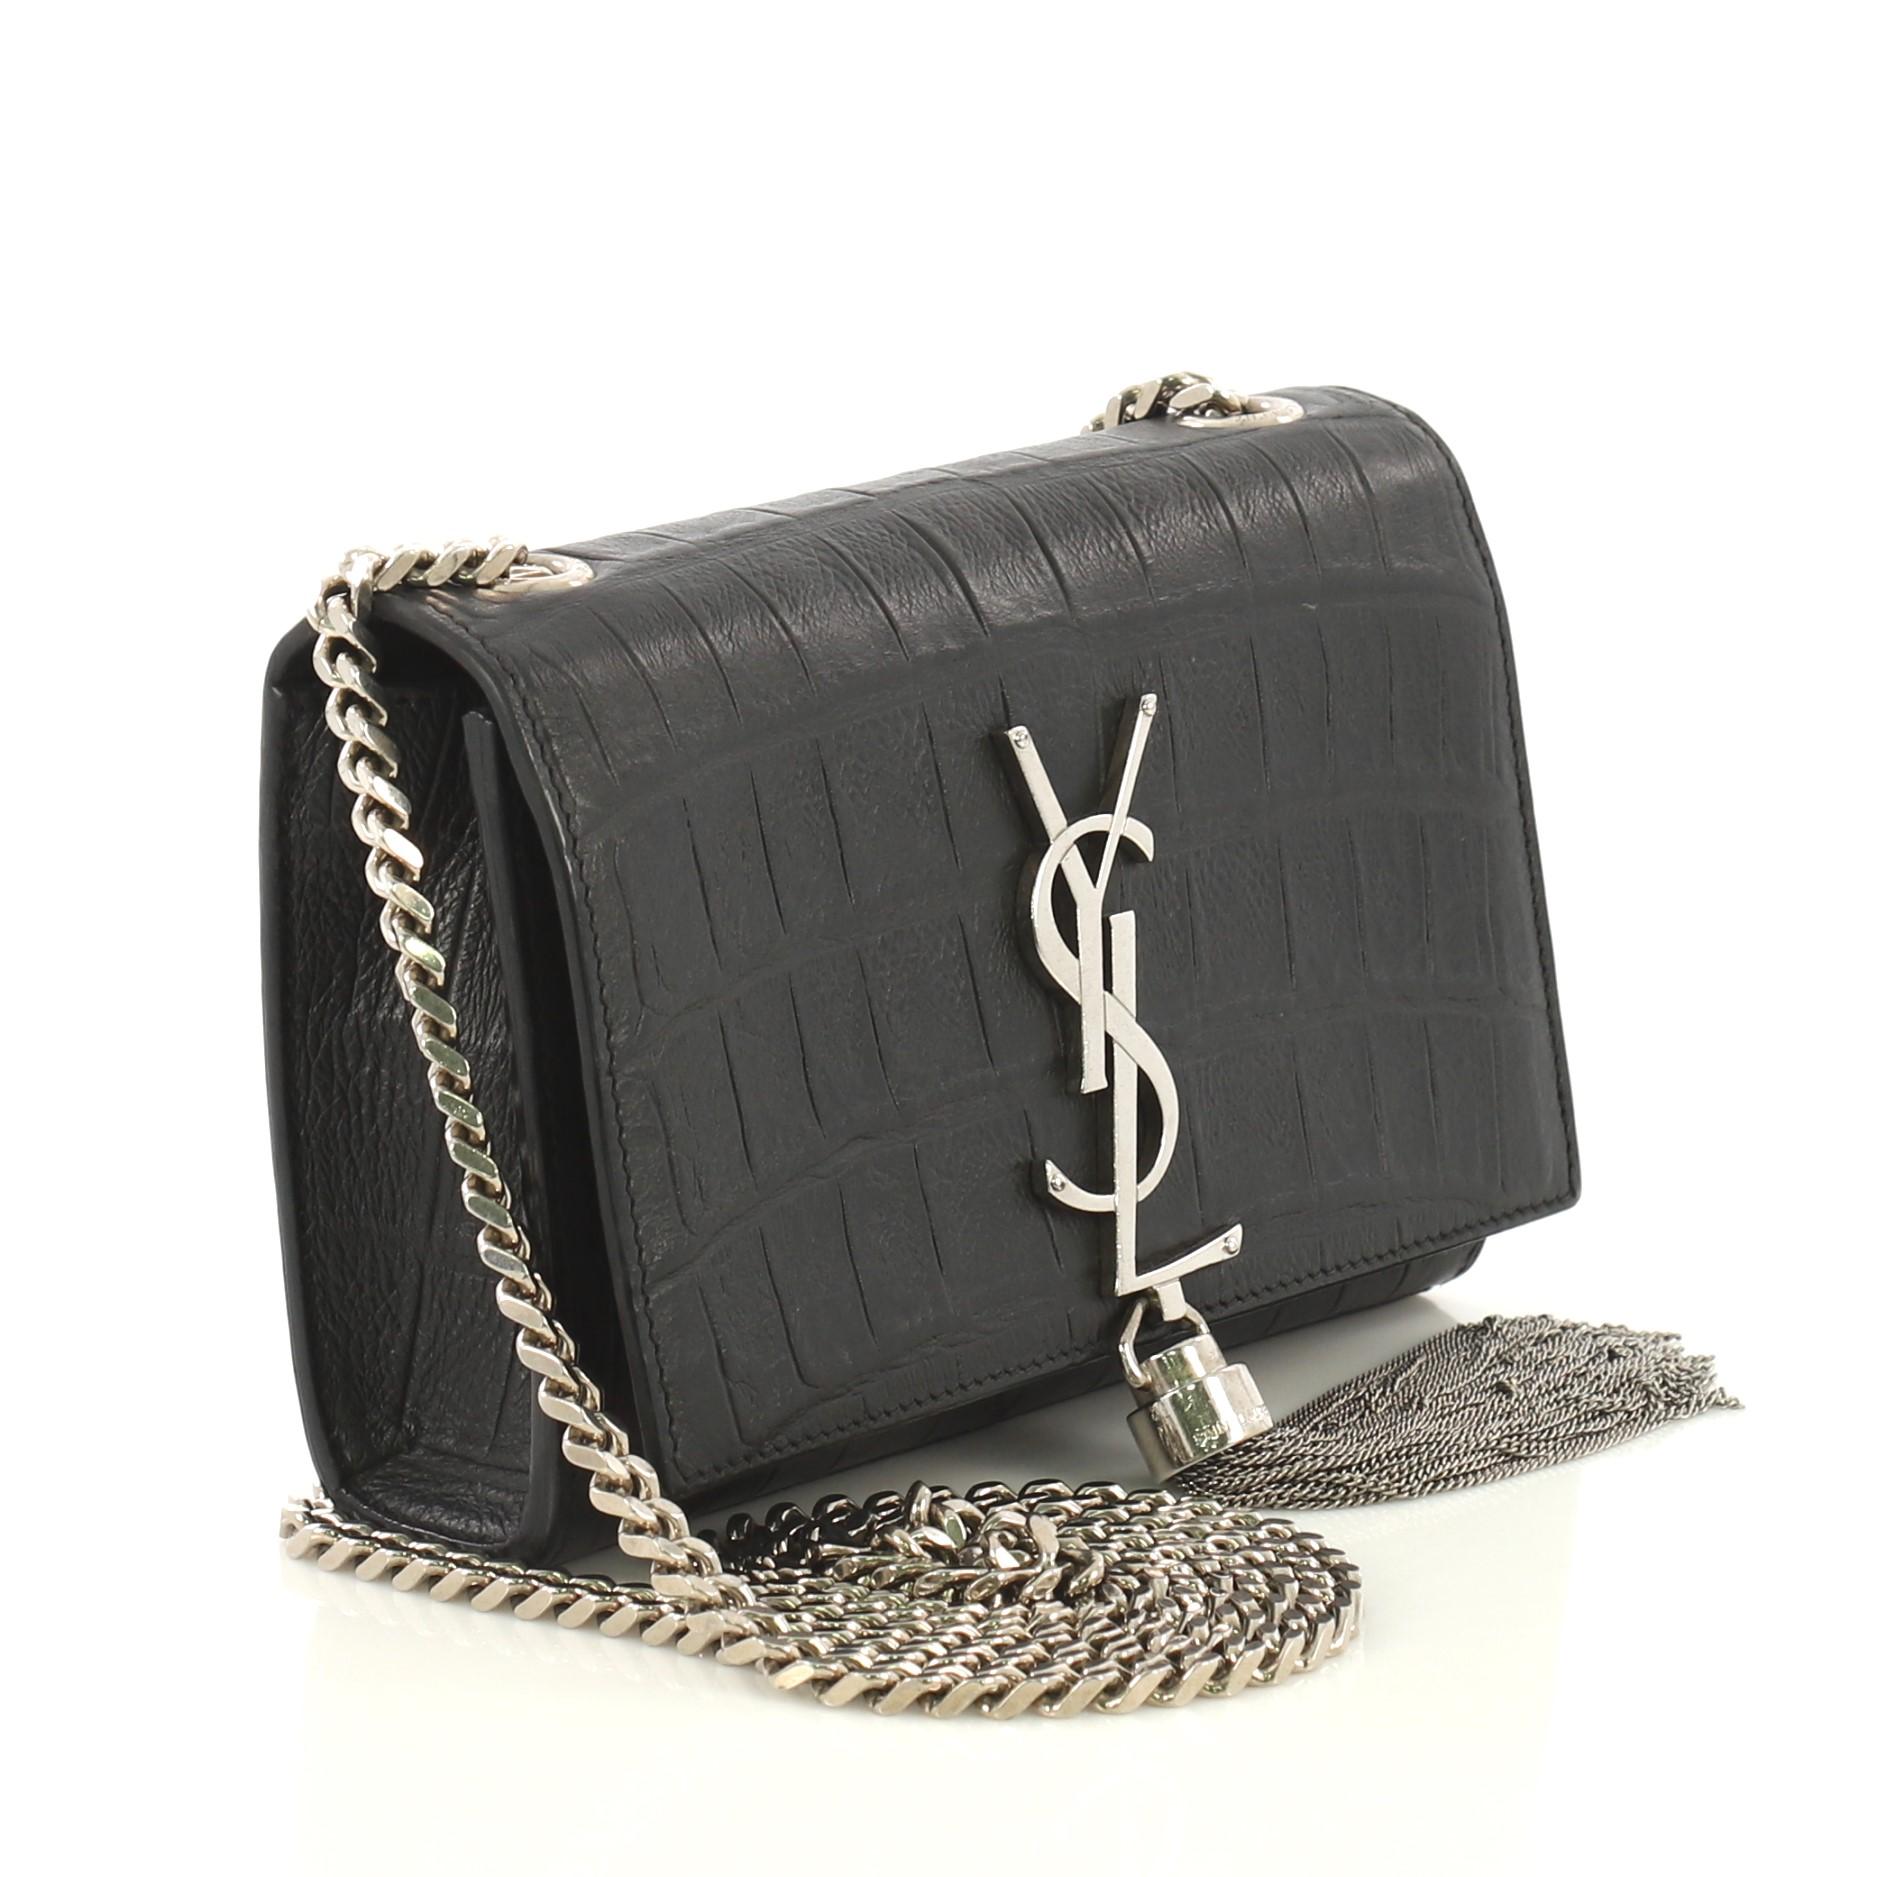 This Saint Laurent Classic Monogram Tassel Crossbody Bag Crocodile Embossed Leather Small, crafted from black crocodile embossed leather, features gourmette chain strap, interlocking YSL logo at its center with attached fringe tassel, and